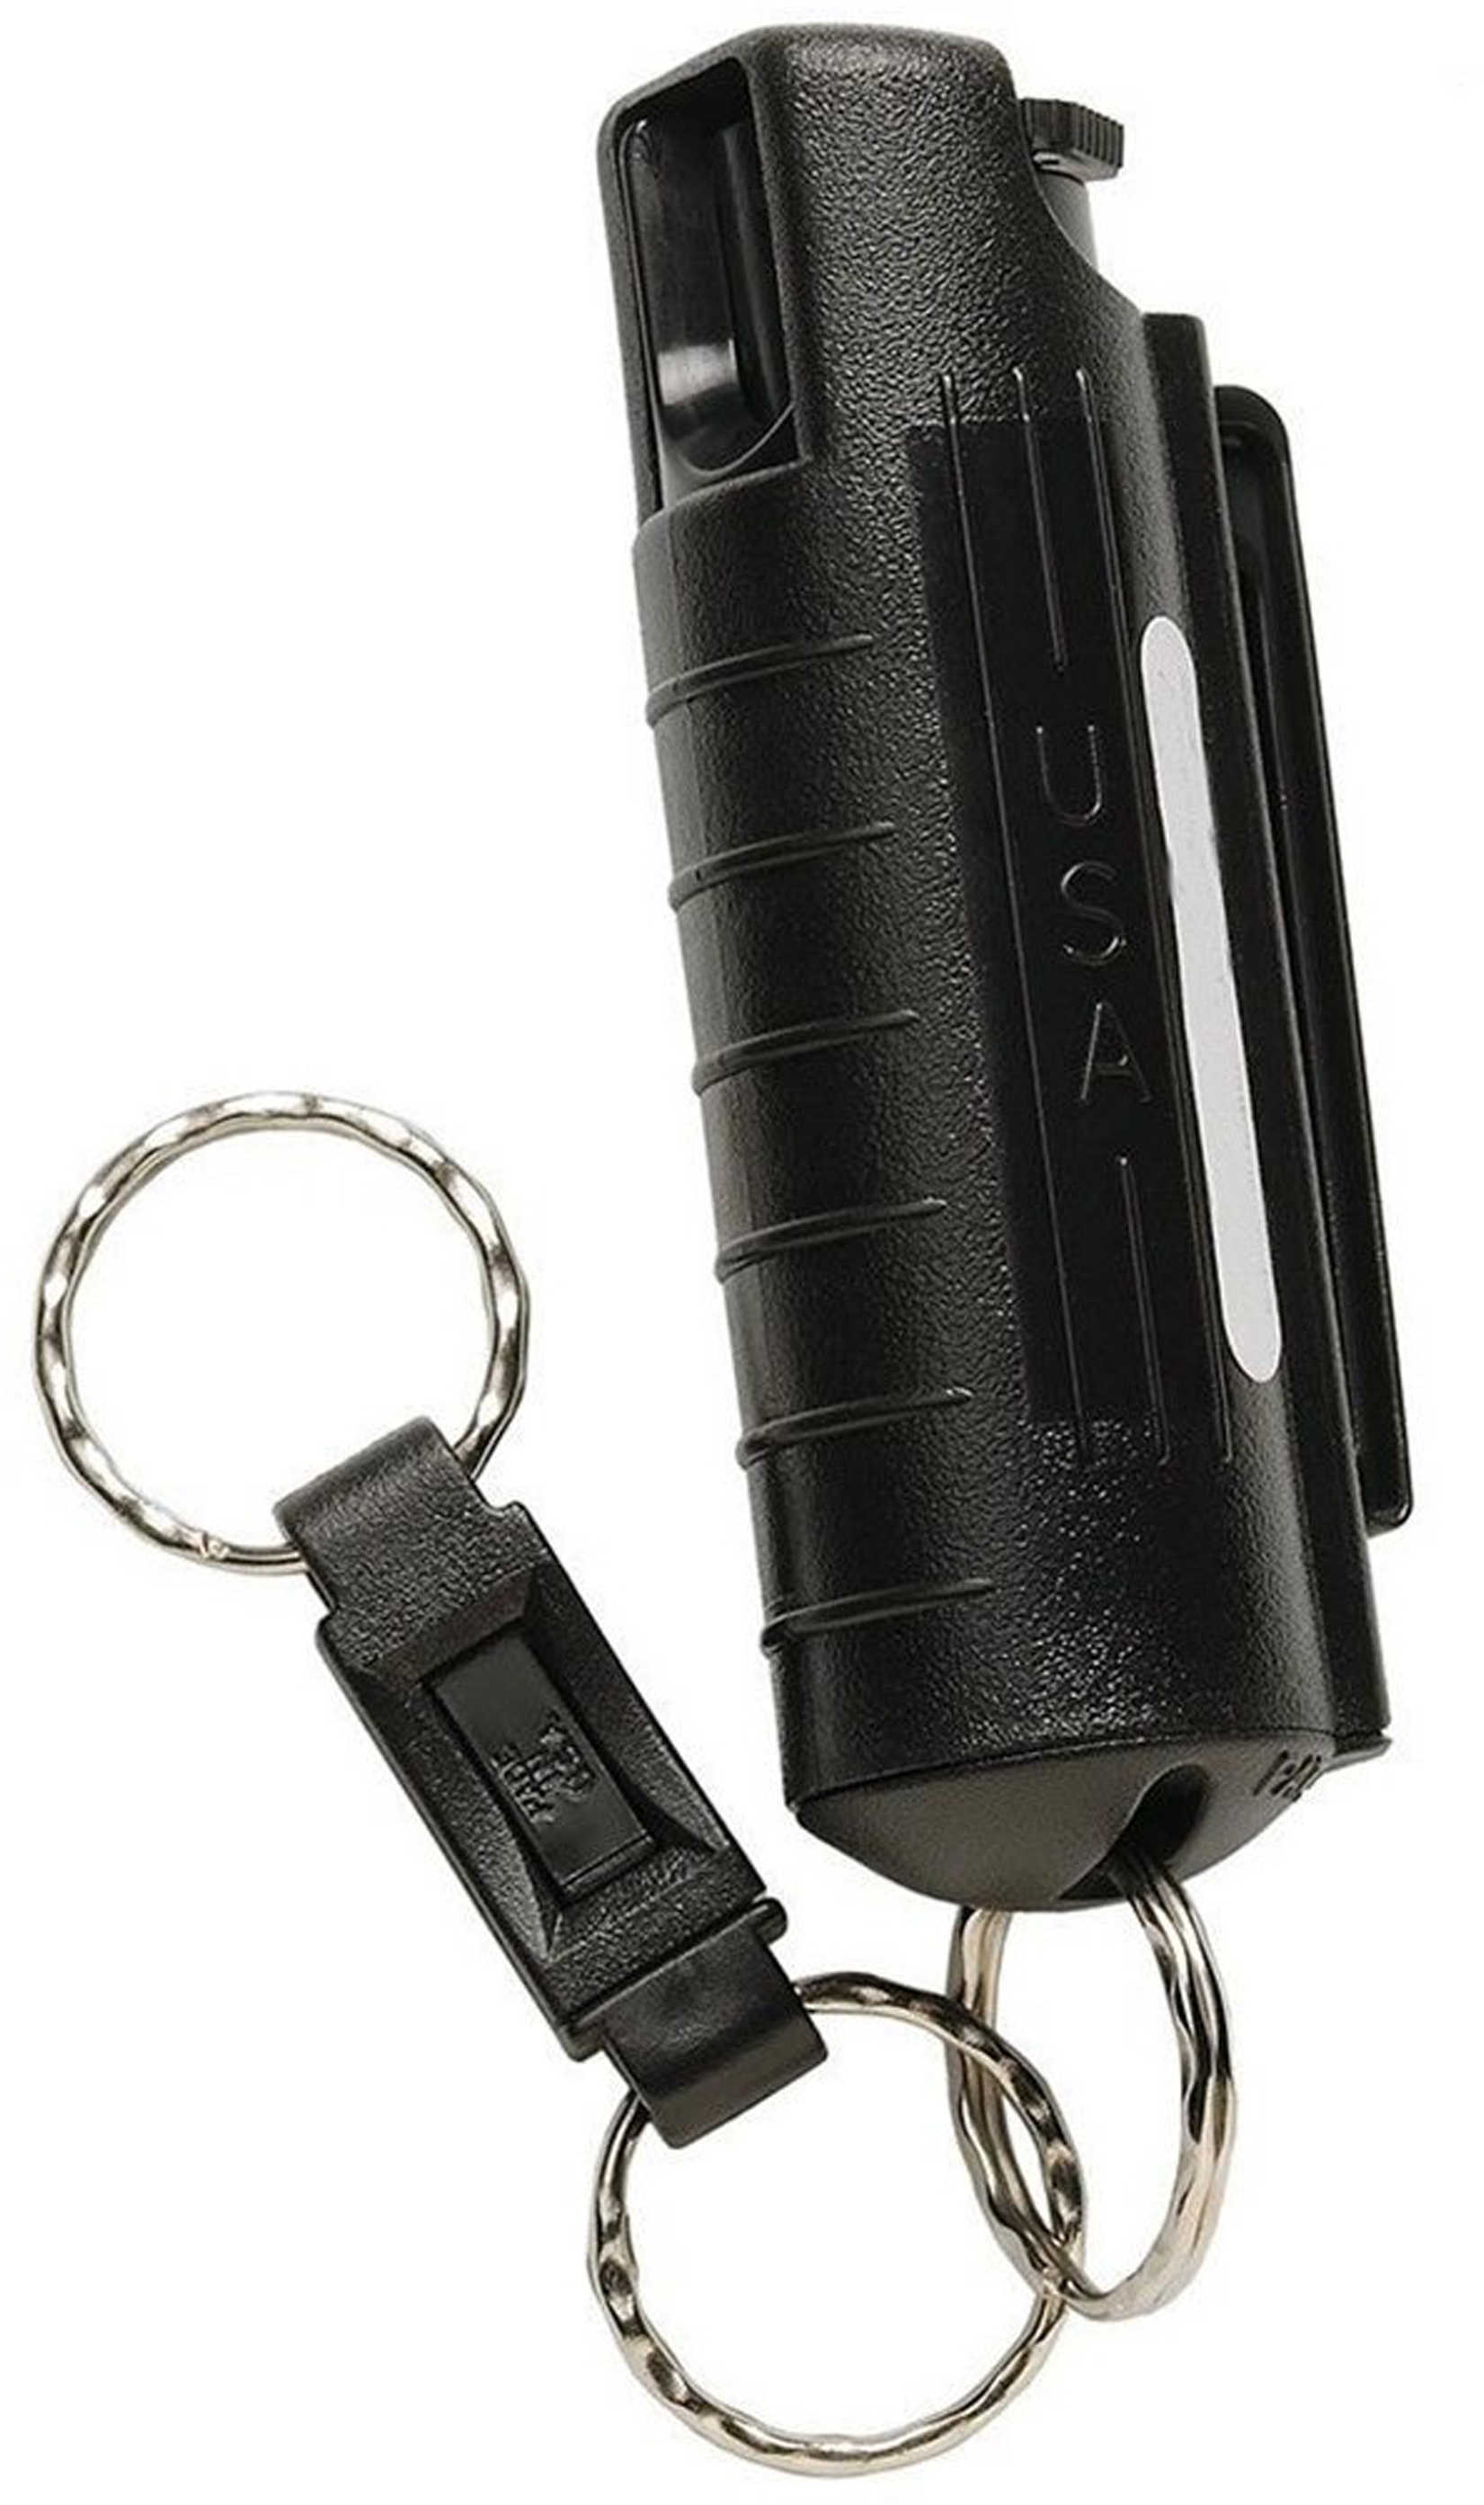 Security Equipment Corporation Sabre Red USA Hardcase Keyring Self Defense Spray (0.54oz/aprox. 25 shots) with Quick Release Black, Clam Pack HC-14-BK-US-02